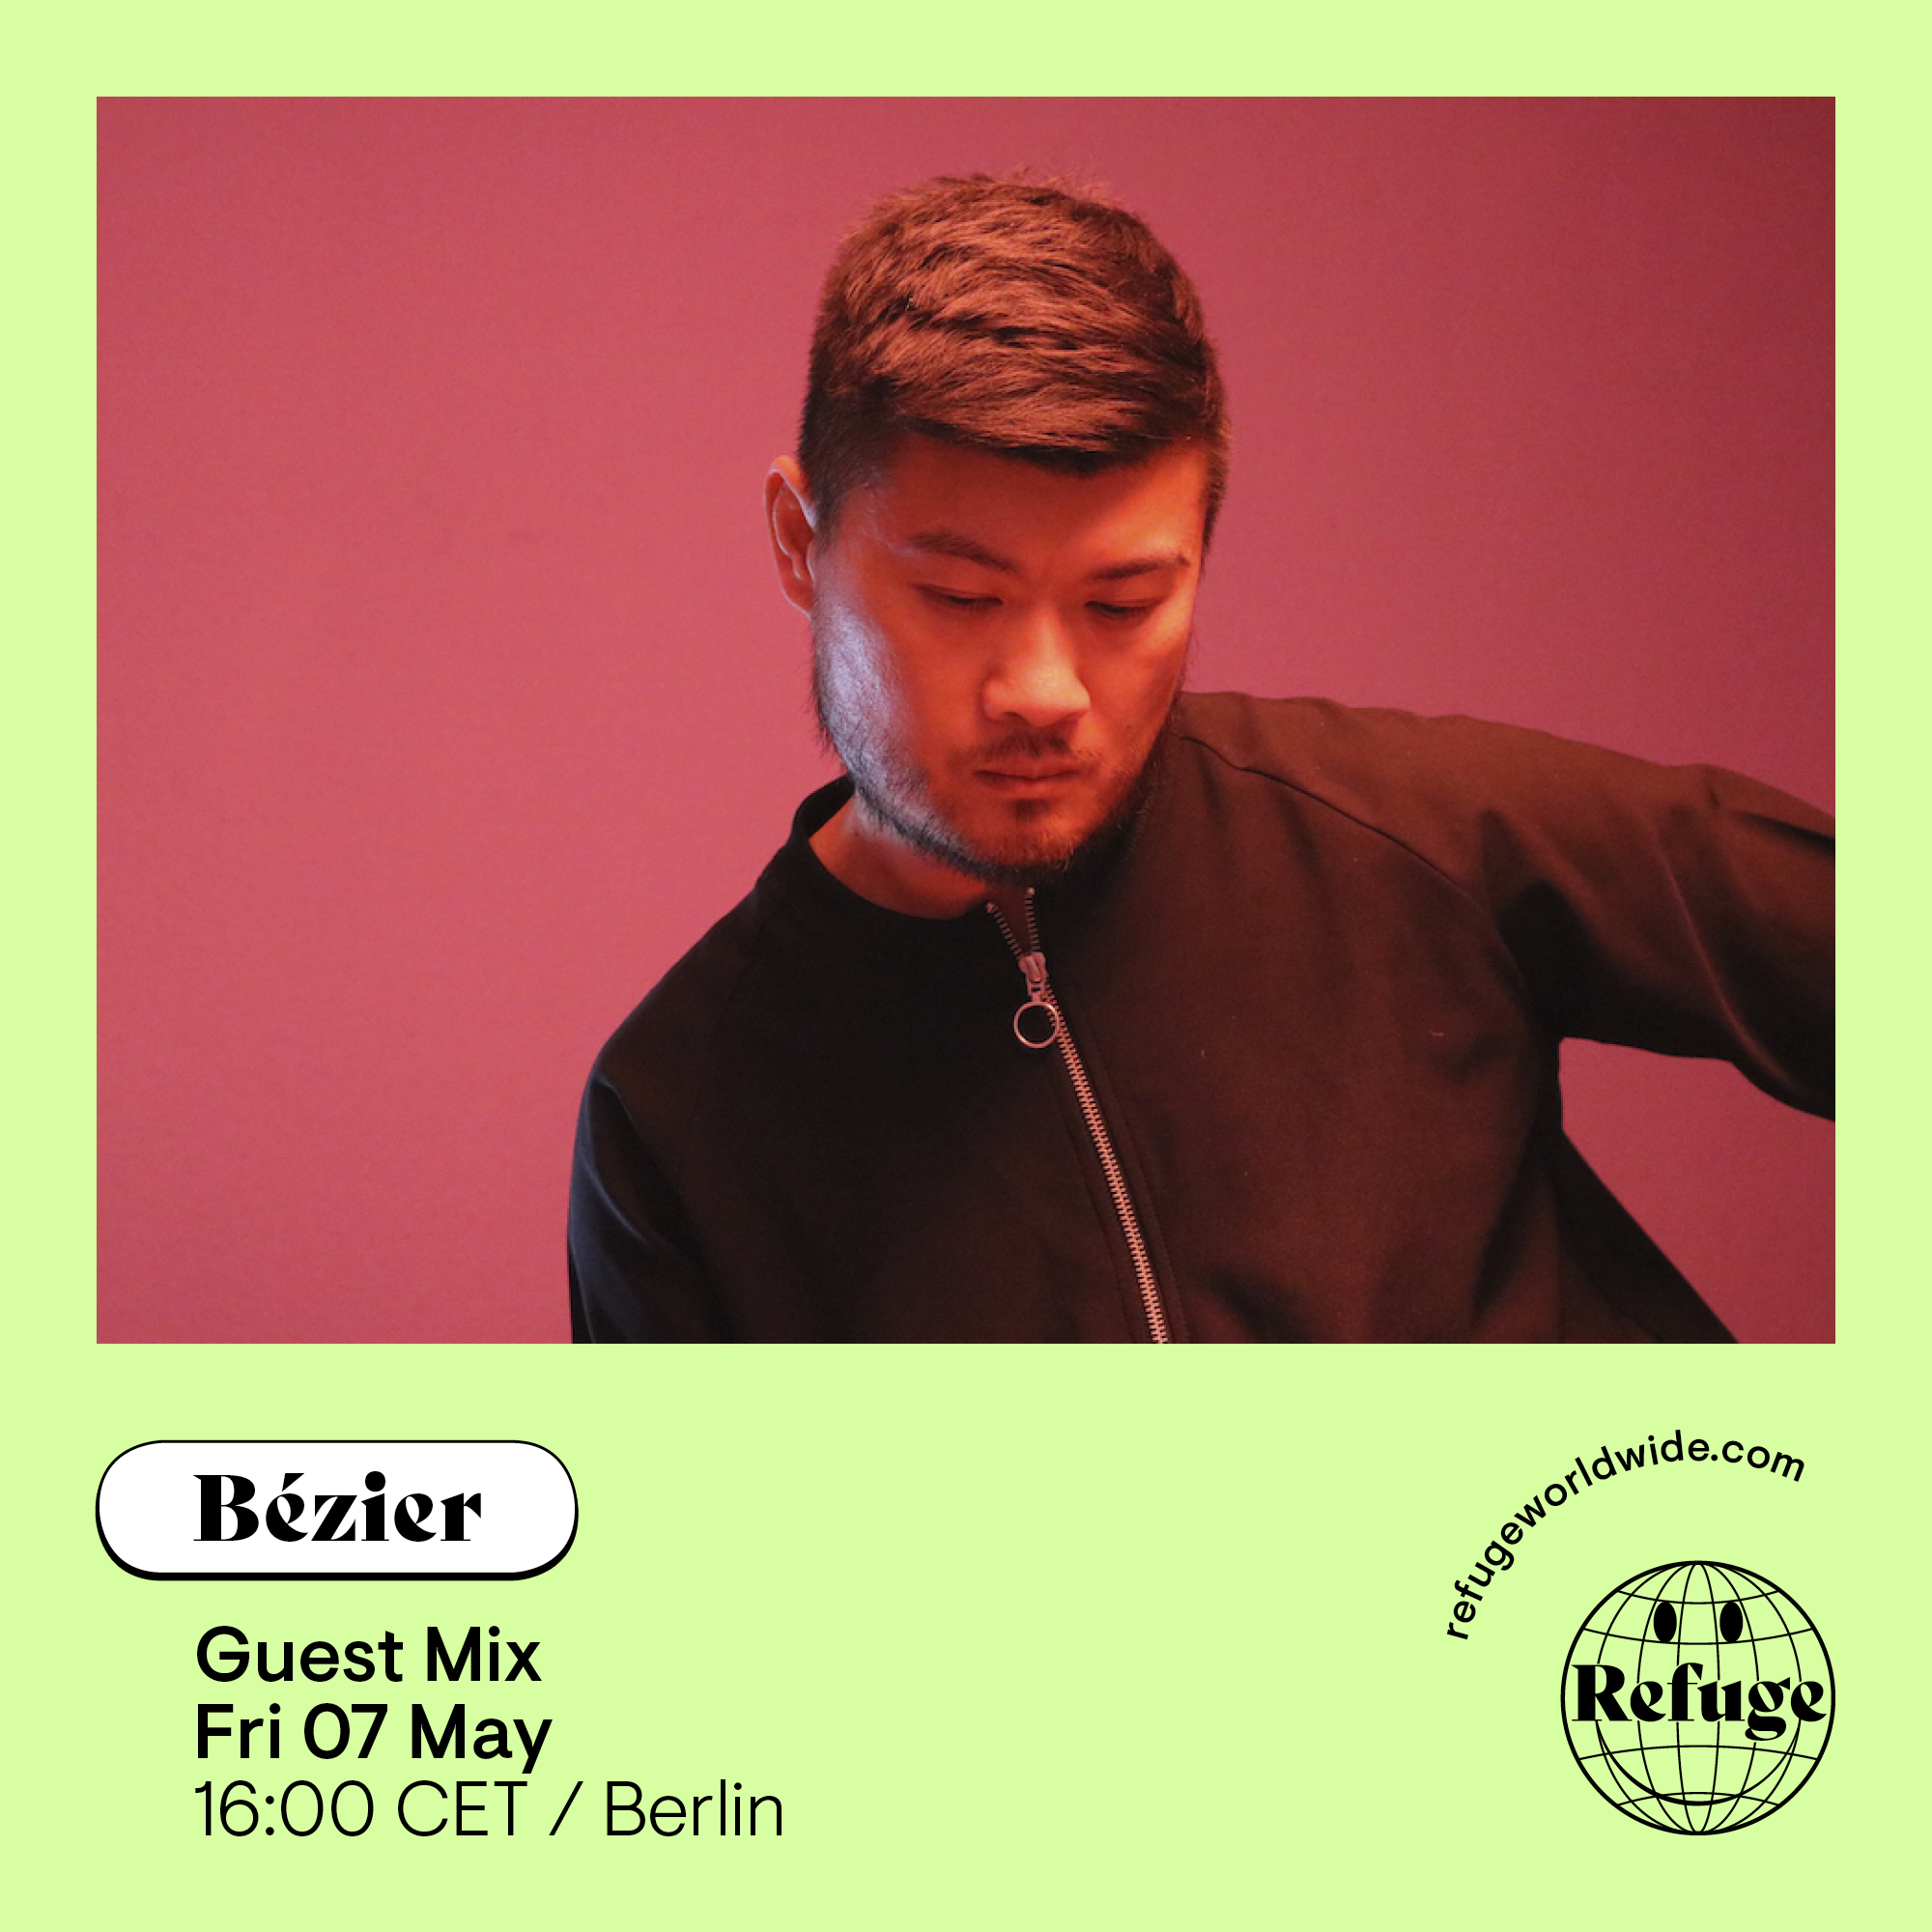 Cover Image for Bézier's guest mix on refuge worldwide in Berlin